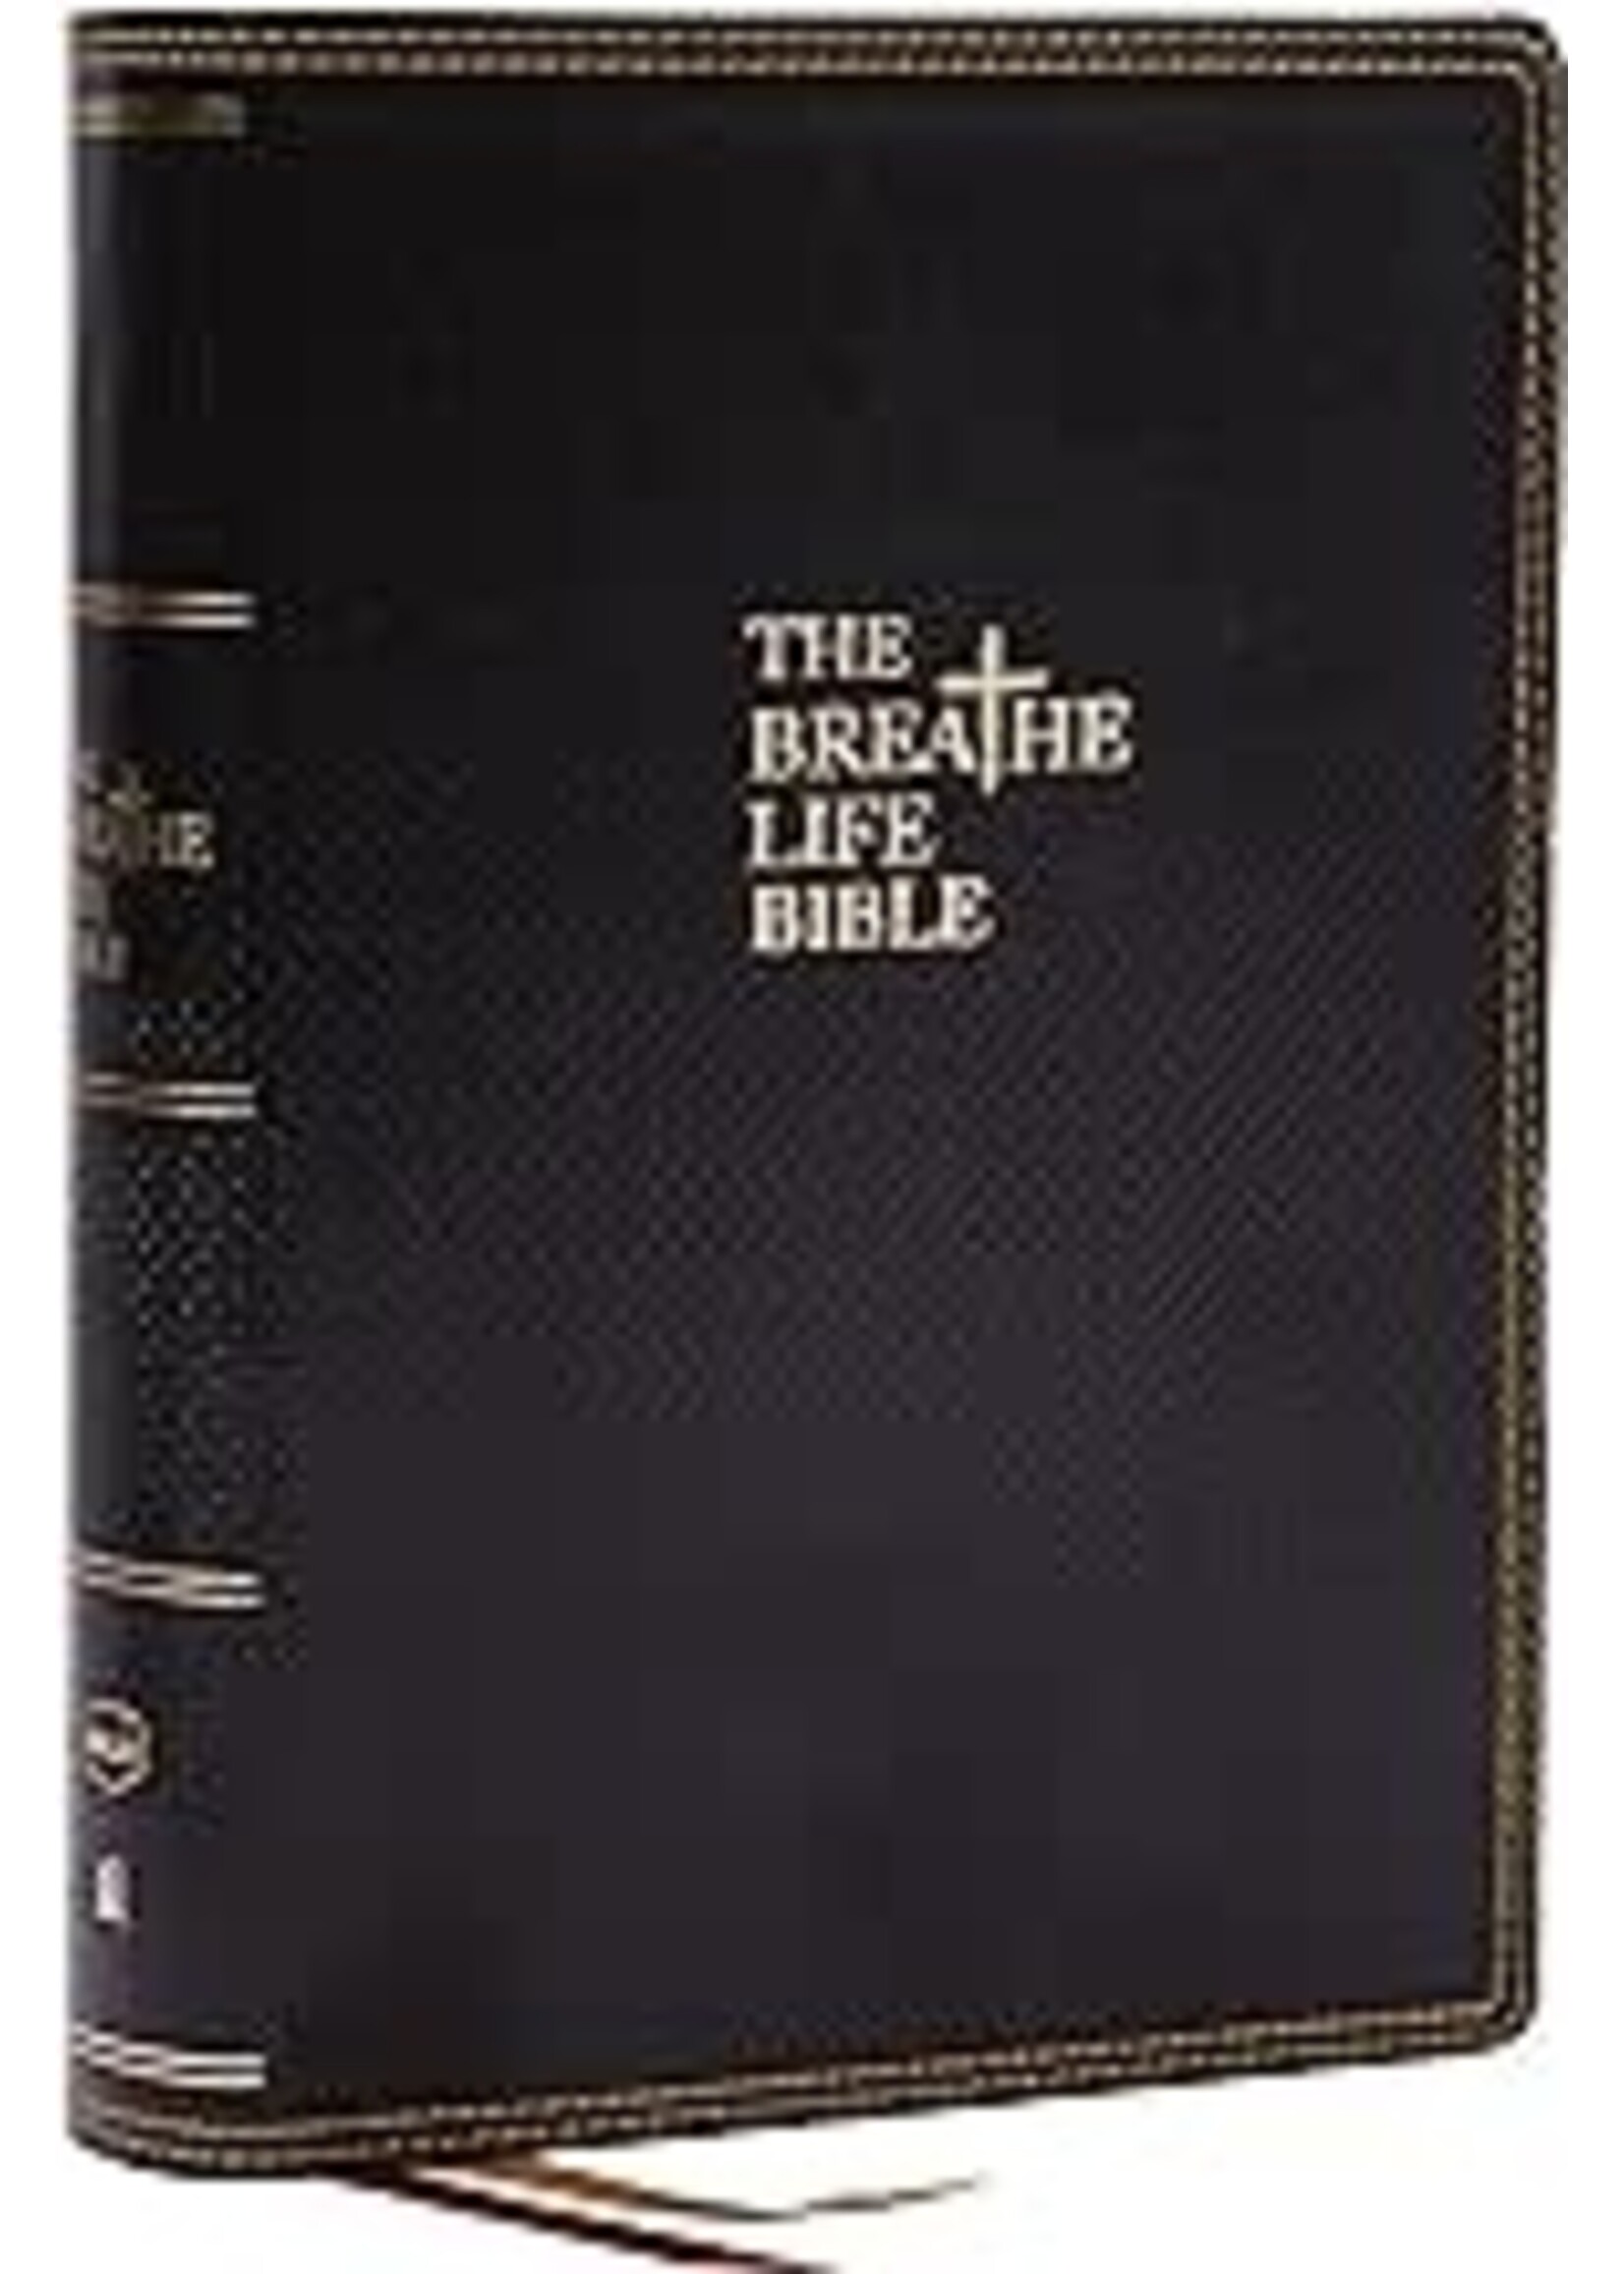 NKJV The Breathe Life Bible: Faith In Action (Comfort Print)-Black Leathersoft